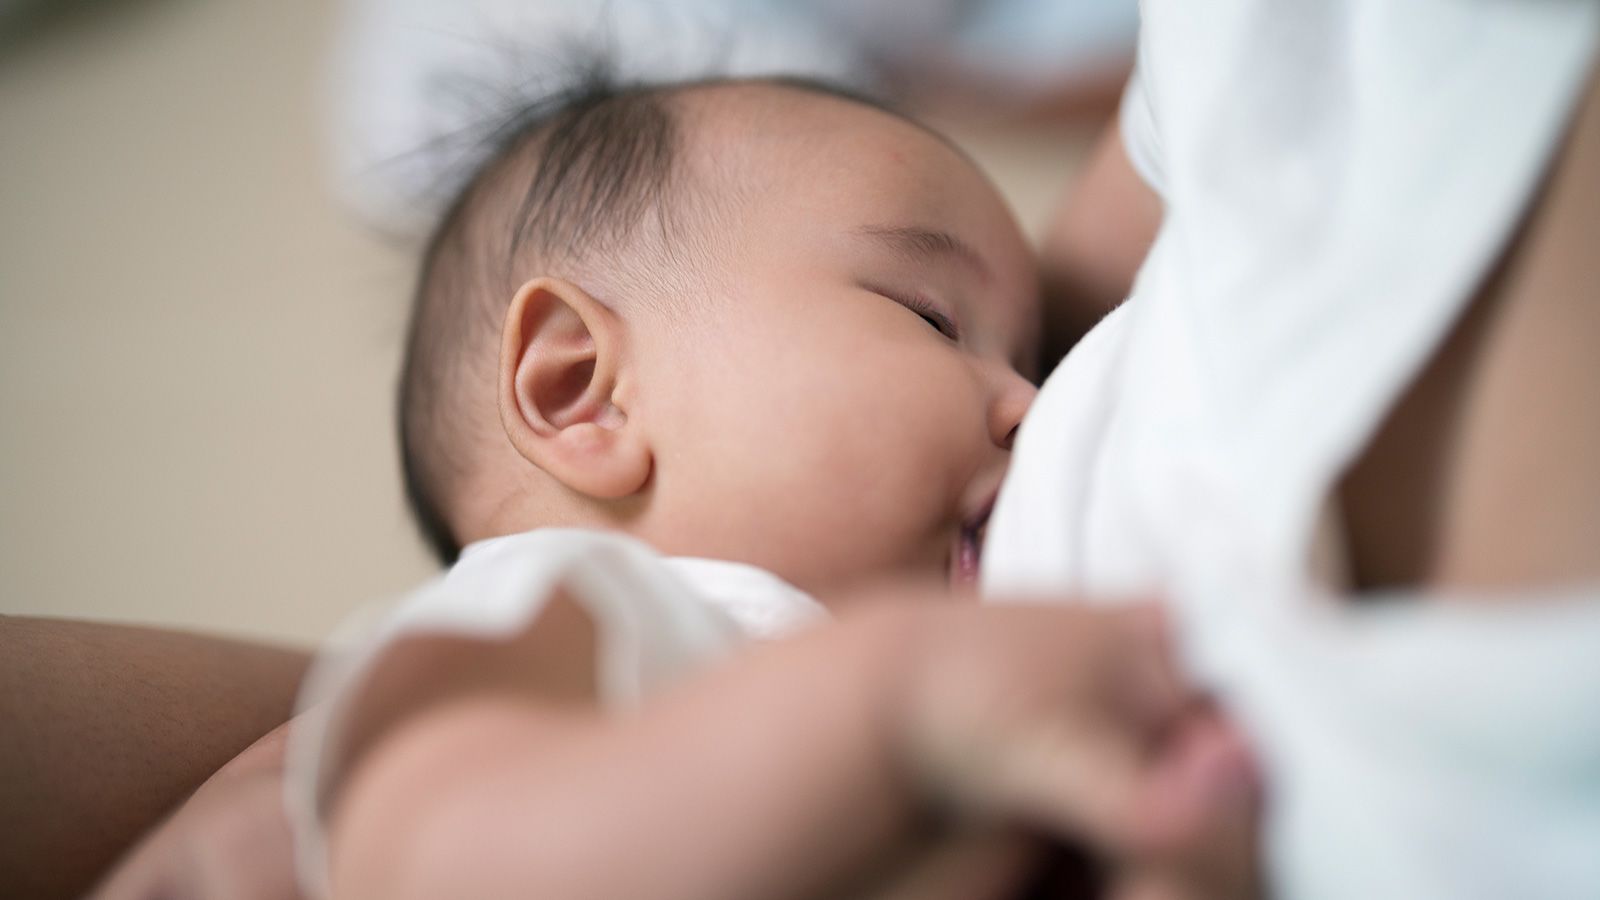 Sleeping Mom And Rafe Son Xvideos - Fathers' role in breastfeeding and infant sleep is key, study finds | CNN